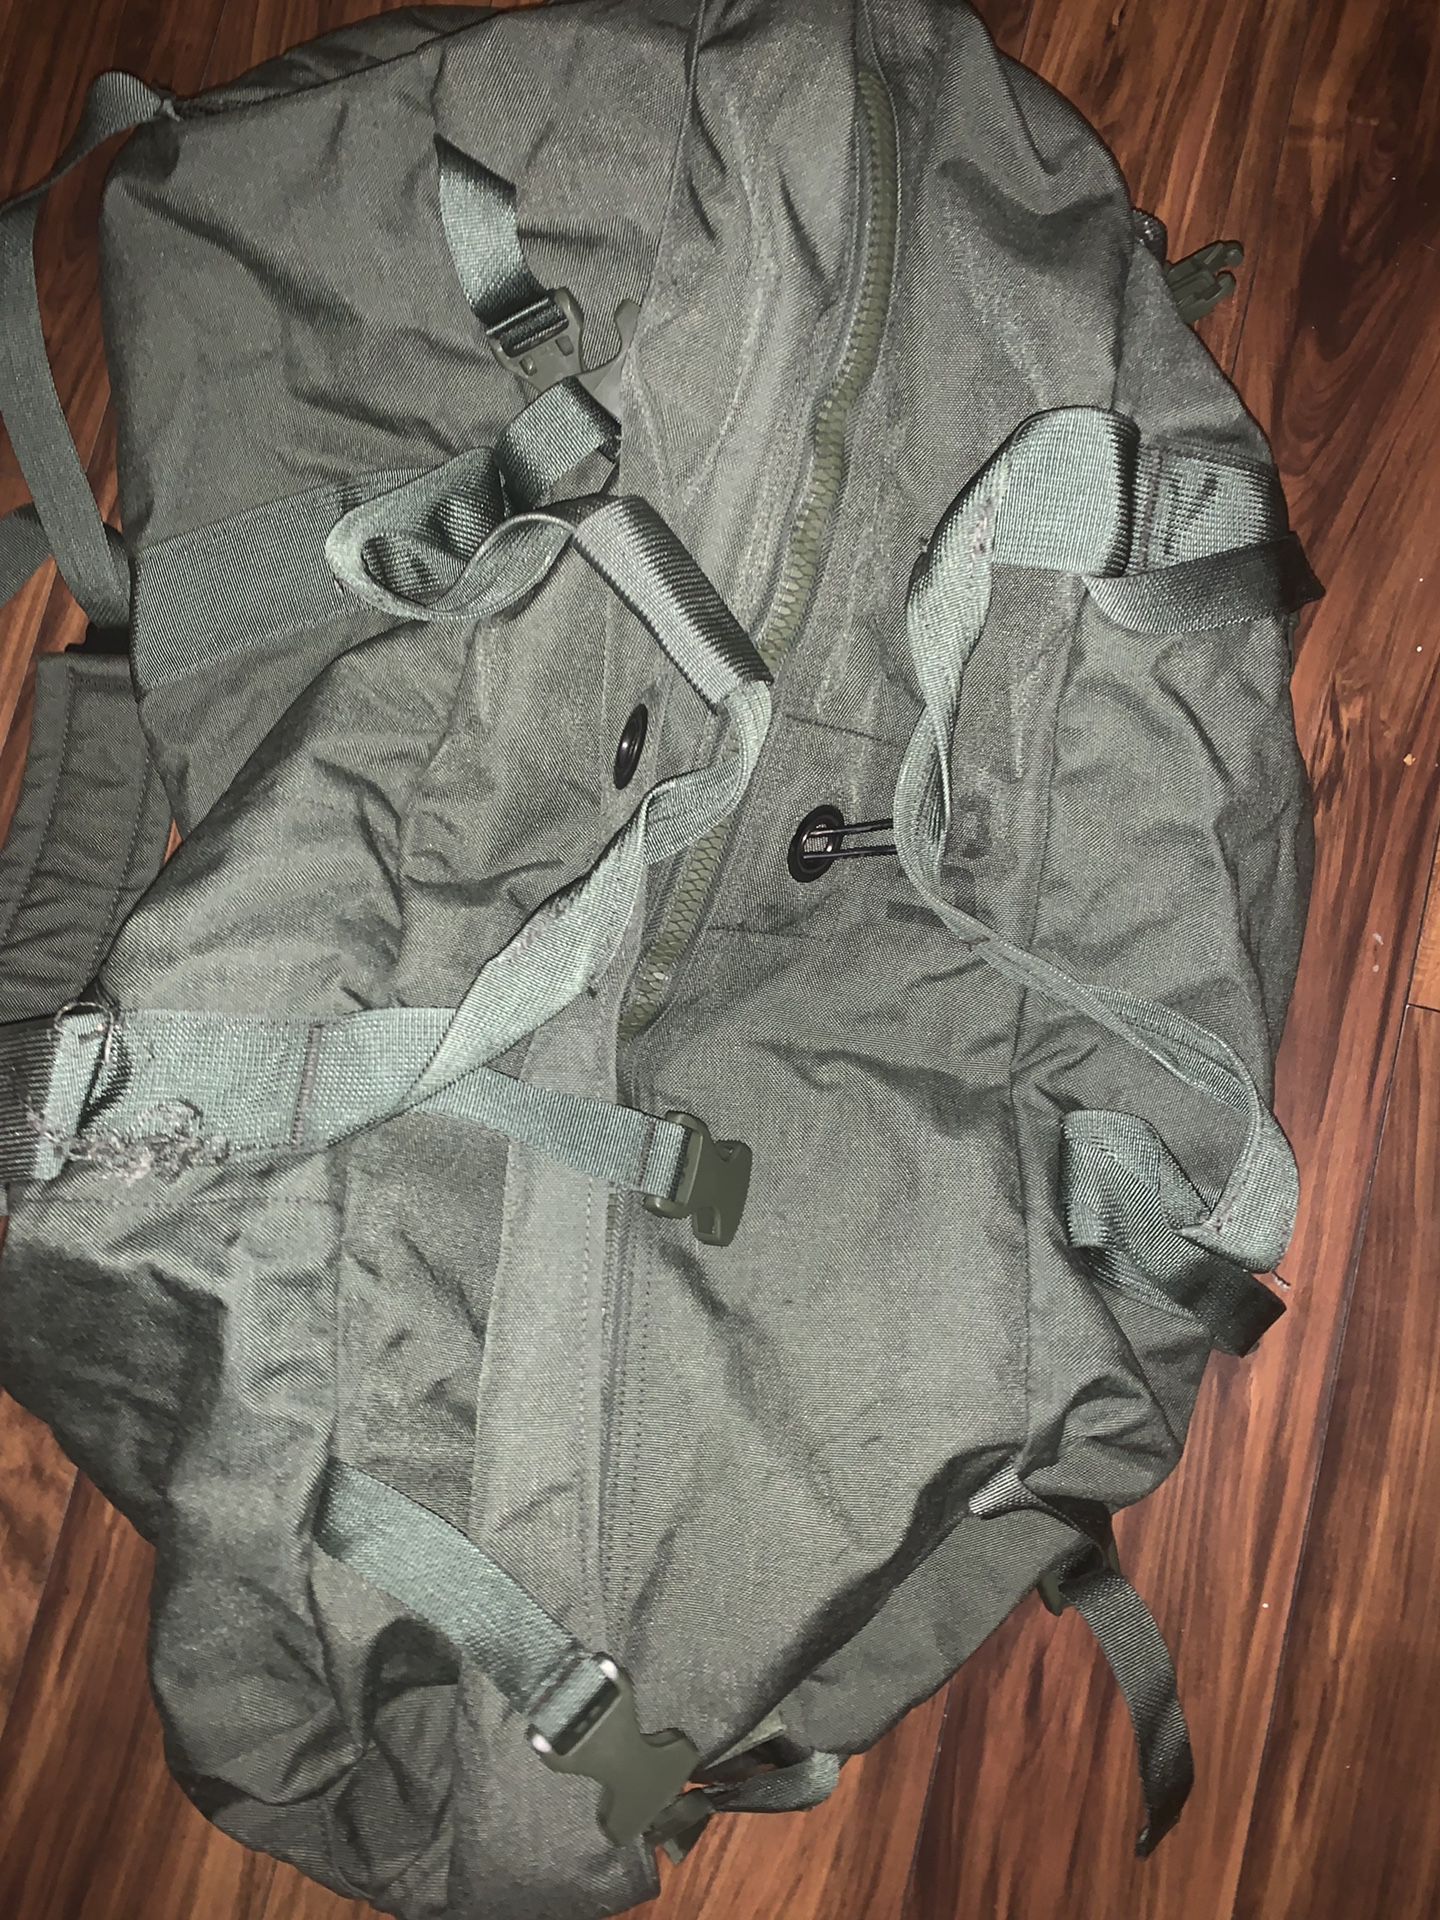 Army green duffle bag $8 low price